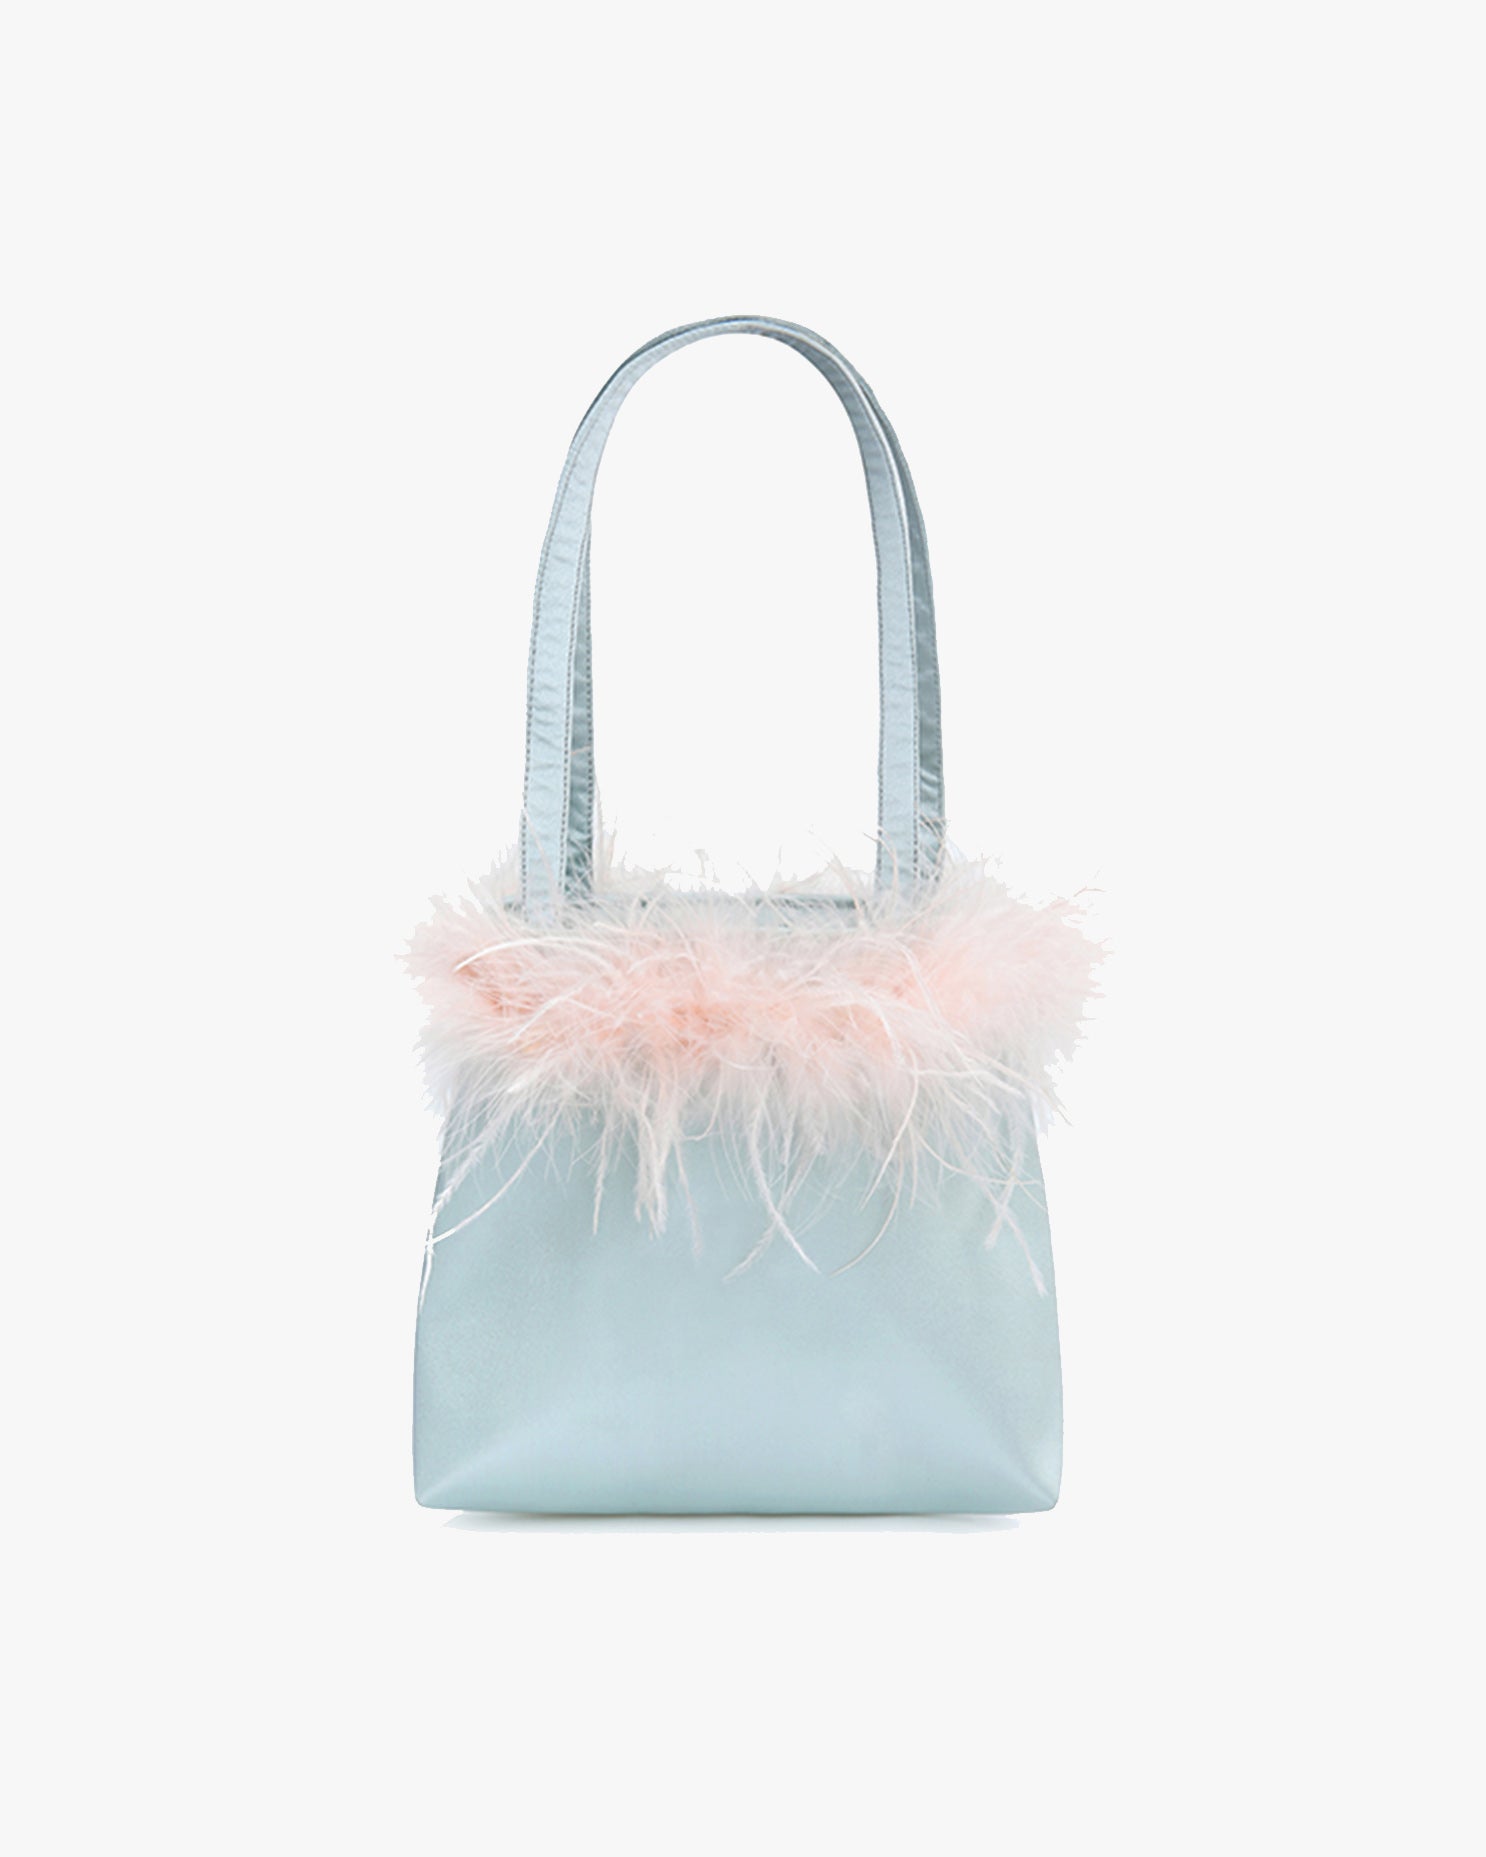 Glam Silk Handbag with Feathers in Light Blue